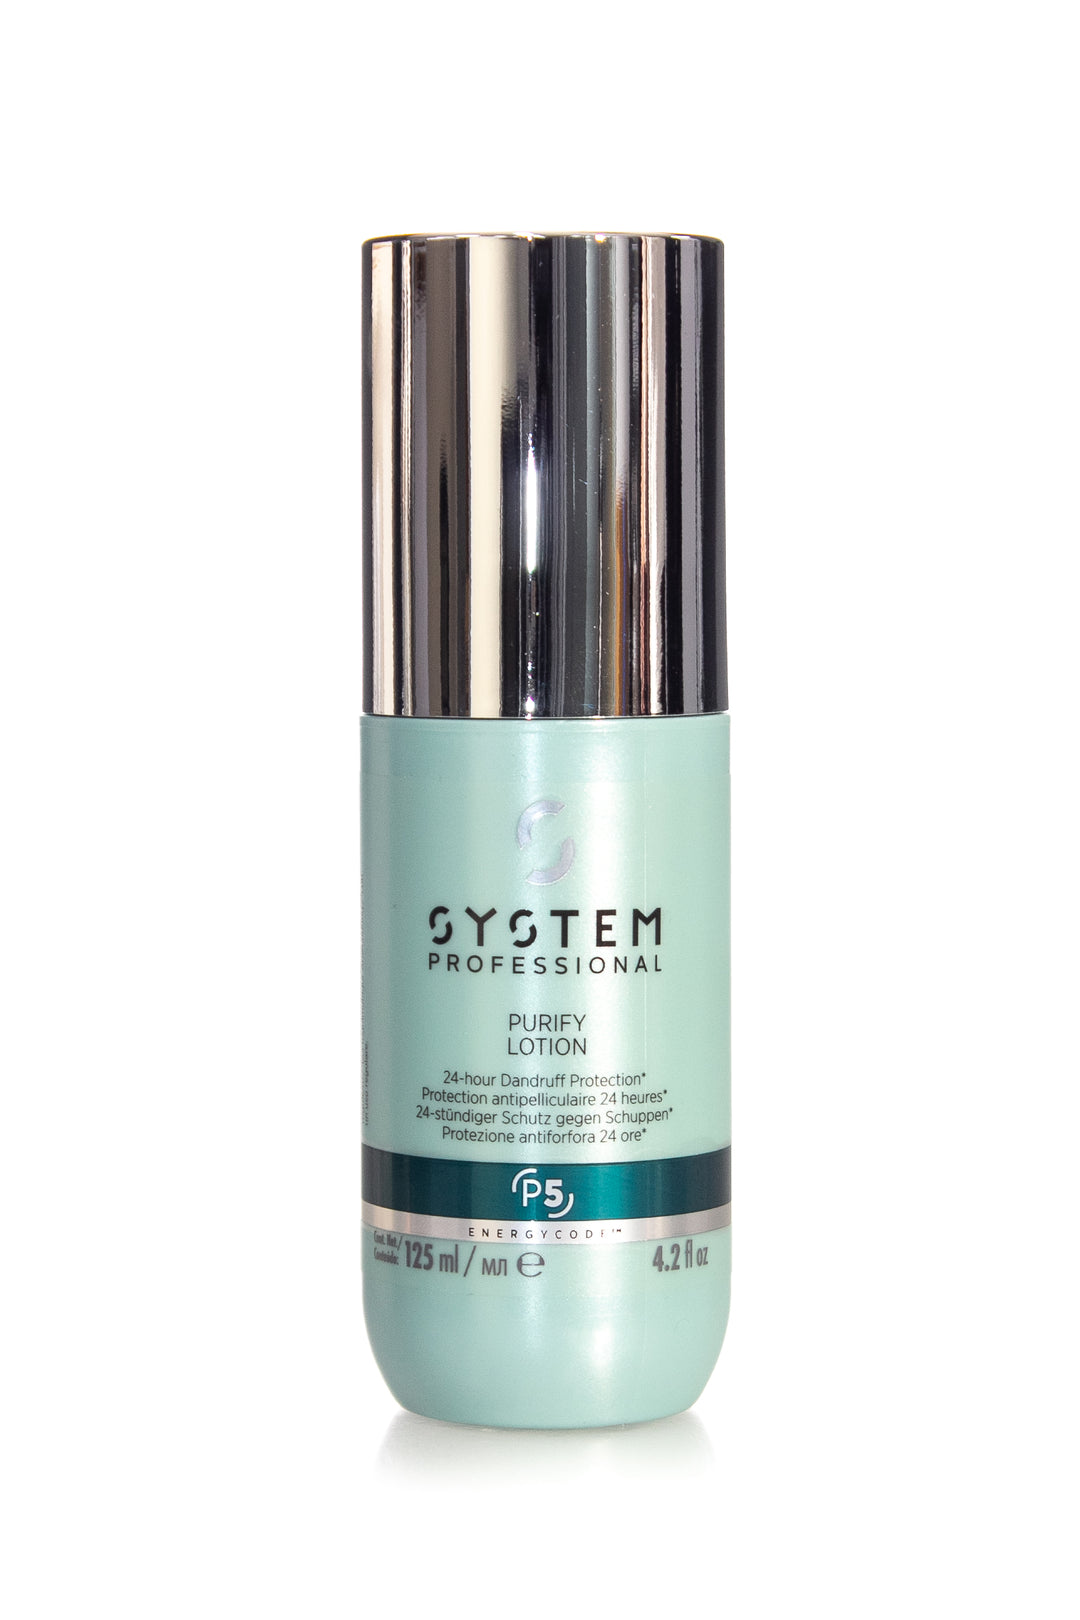 SYSTEM PROFESSIONAL Purify Lotion 24-Hour Dandruff Protection  | 125ml